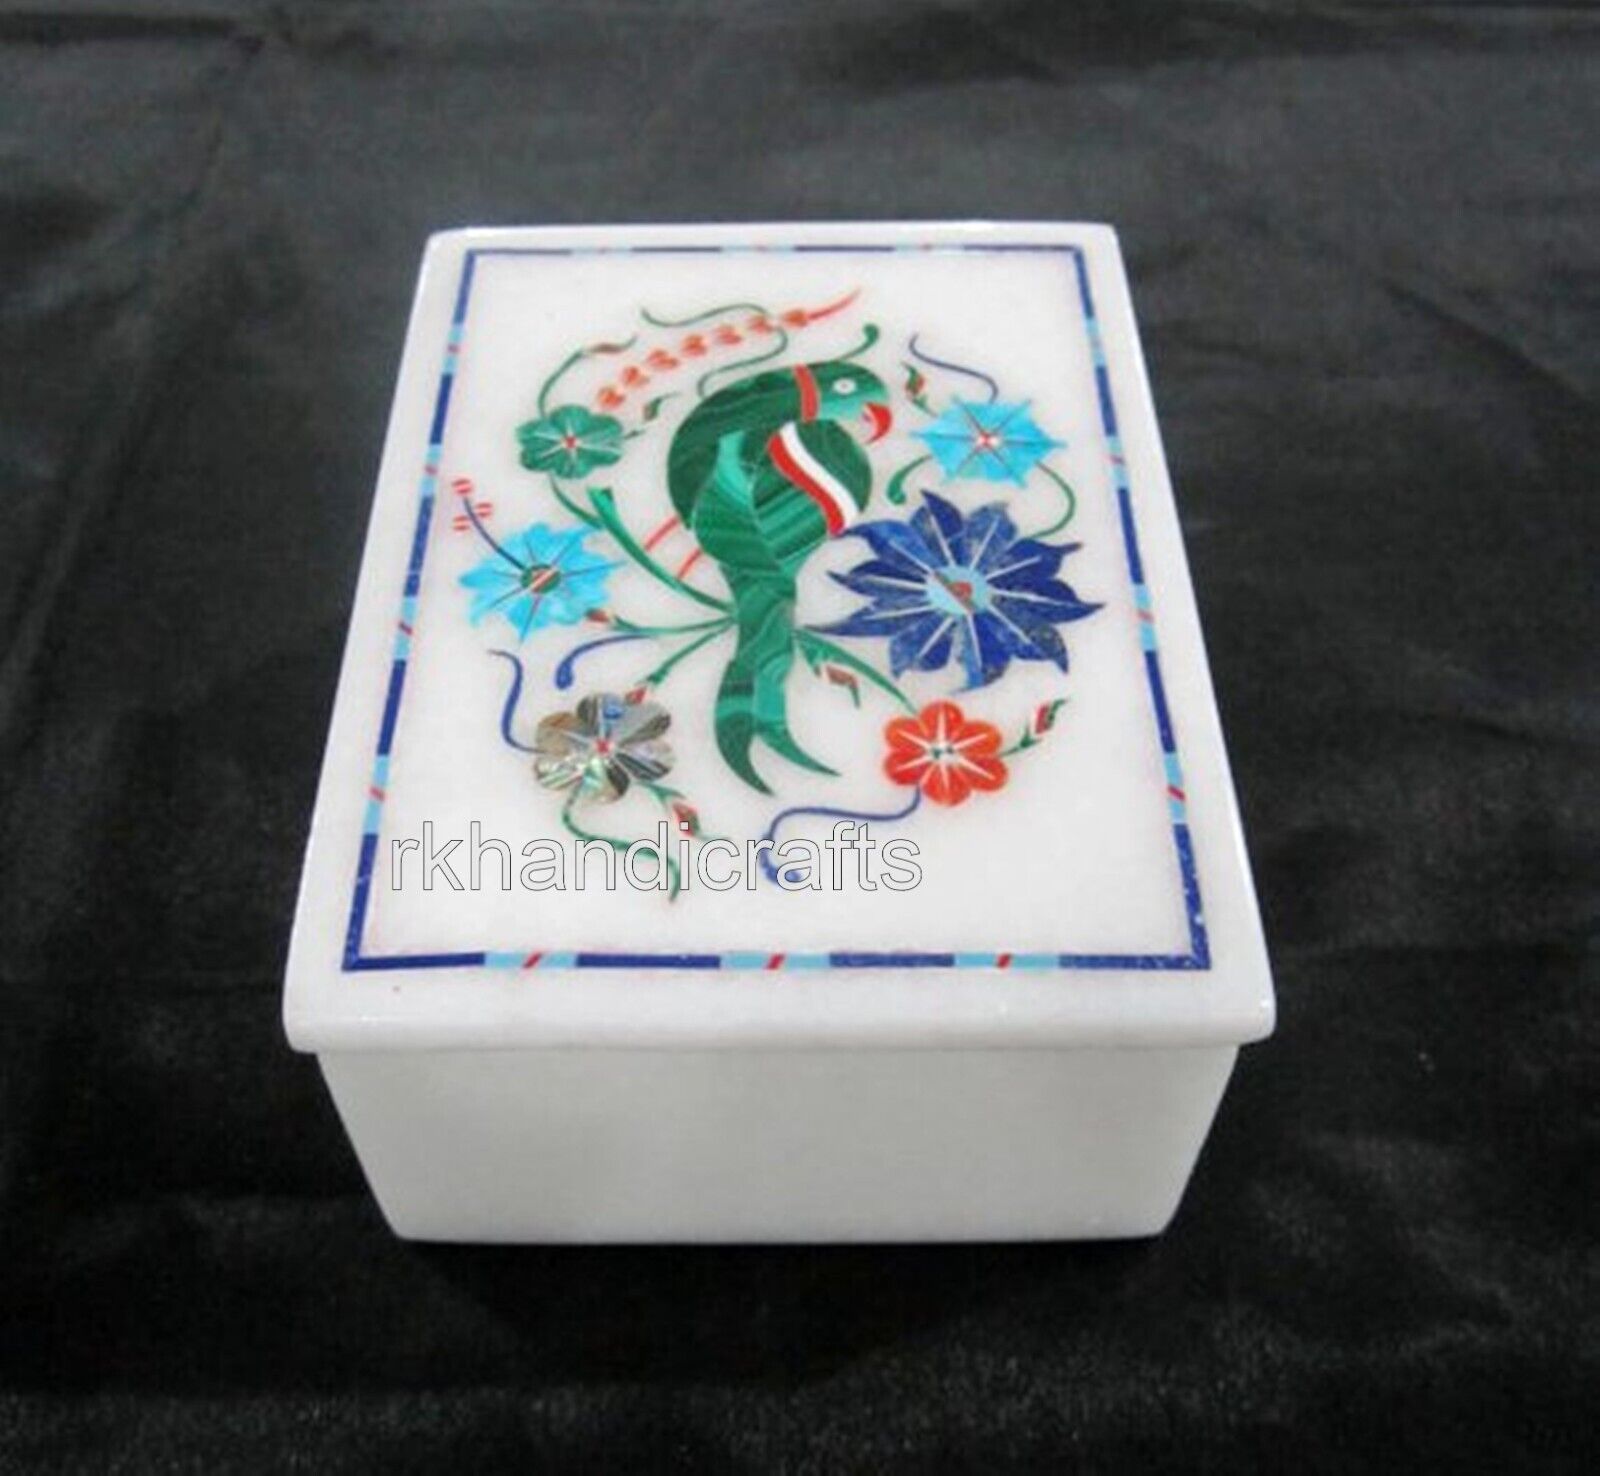 5 x 3.5 Inches White Marble Multi Purpose Box Inlaid with Parrot Art Jewelry Box